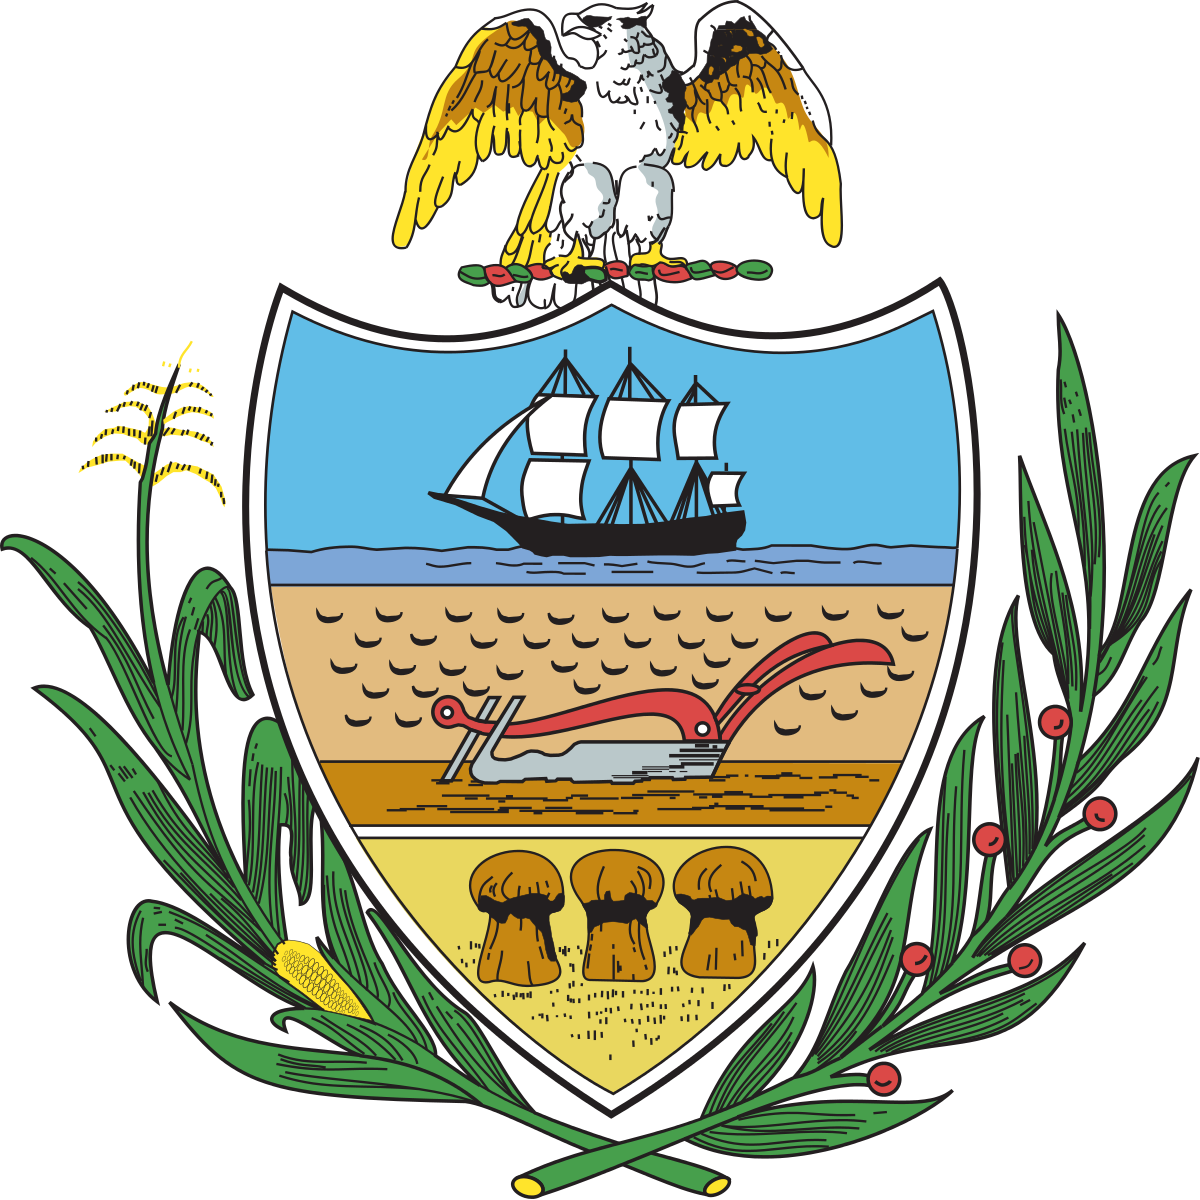 The seal for Allegheny County, Pennsylvania.